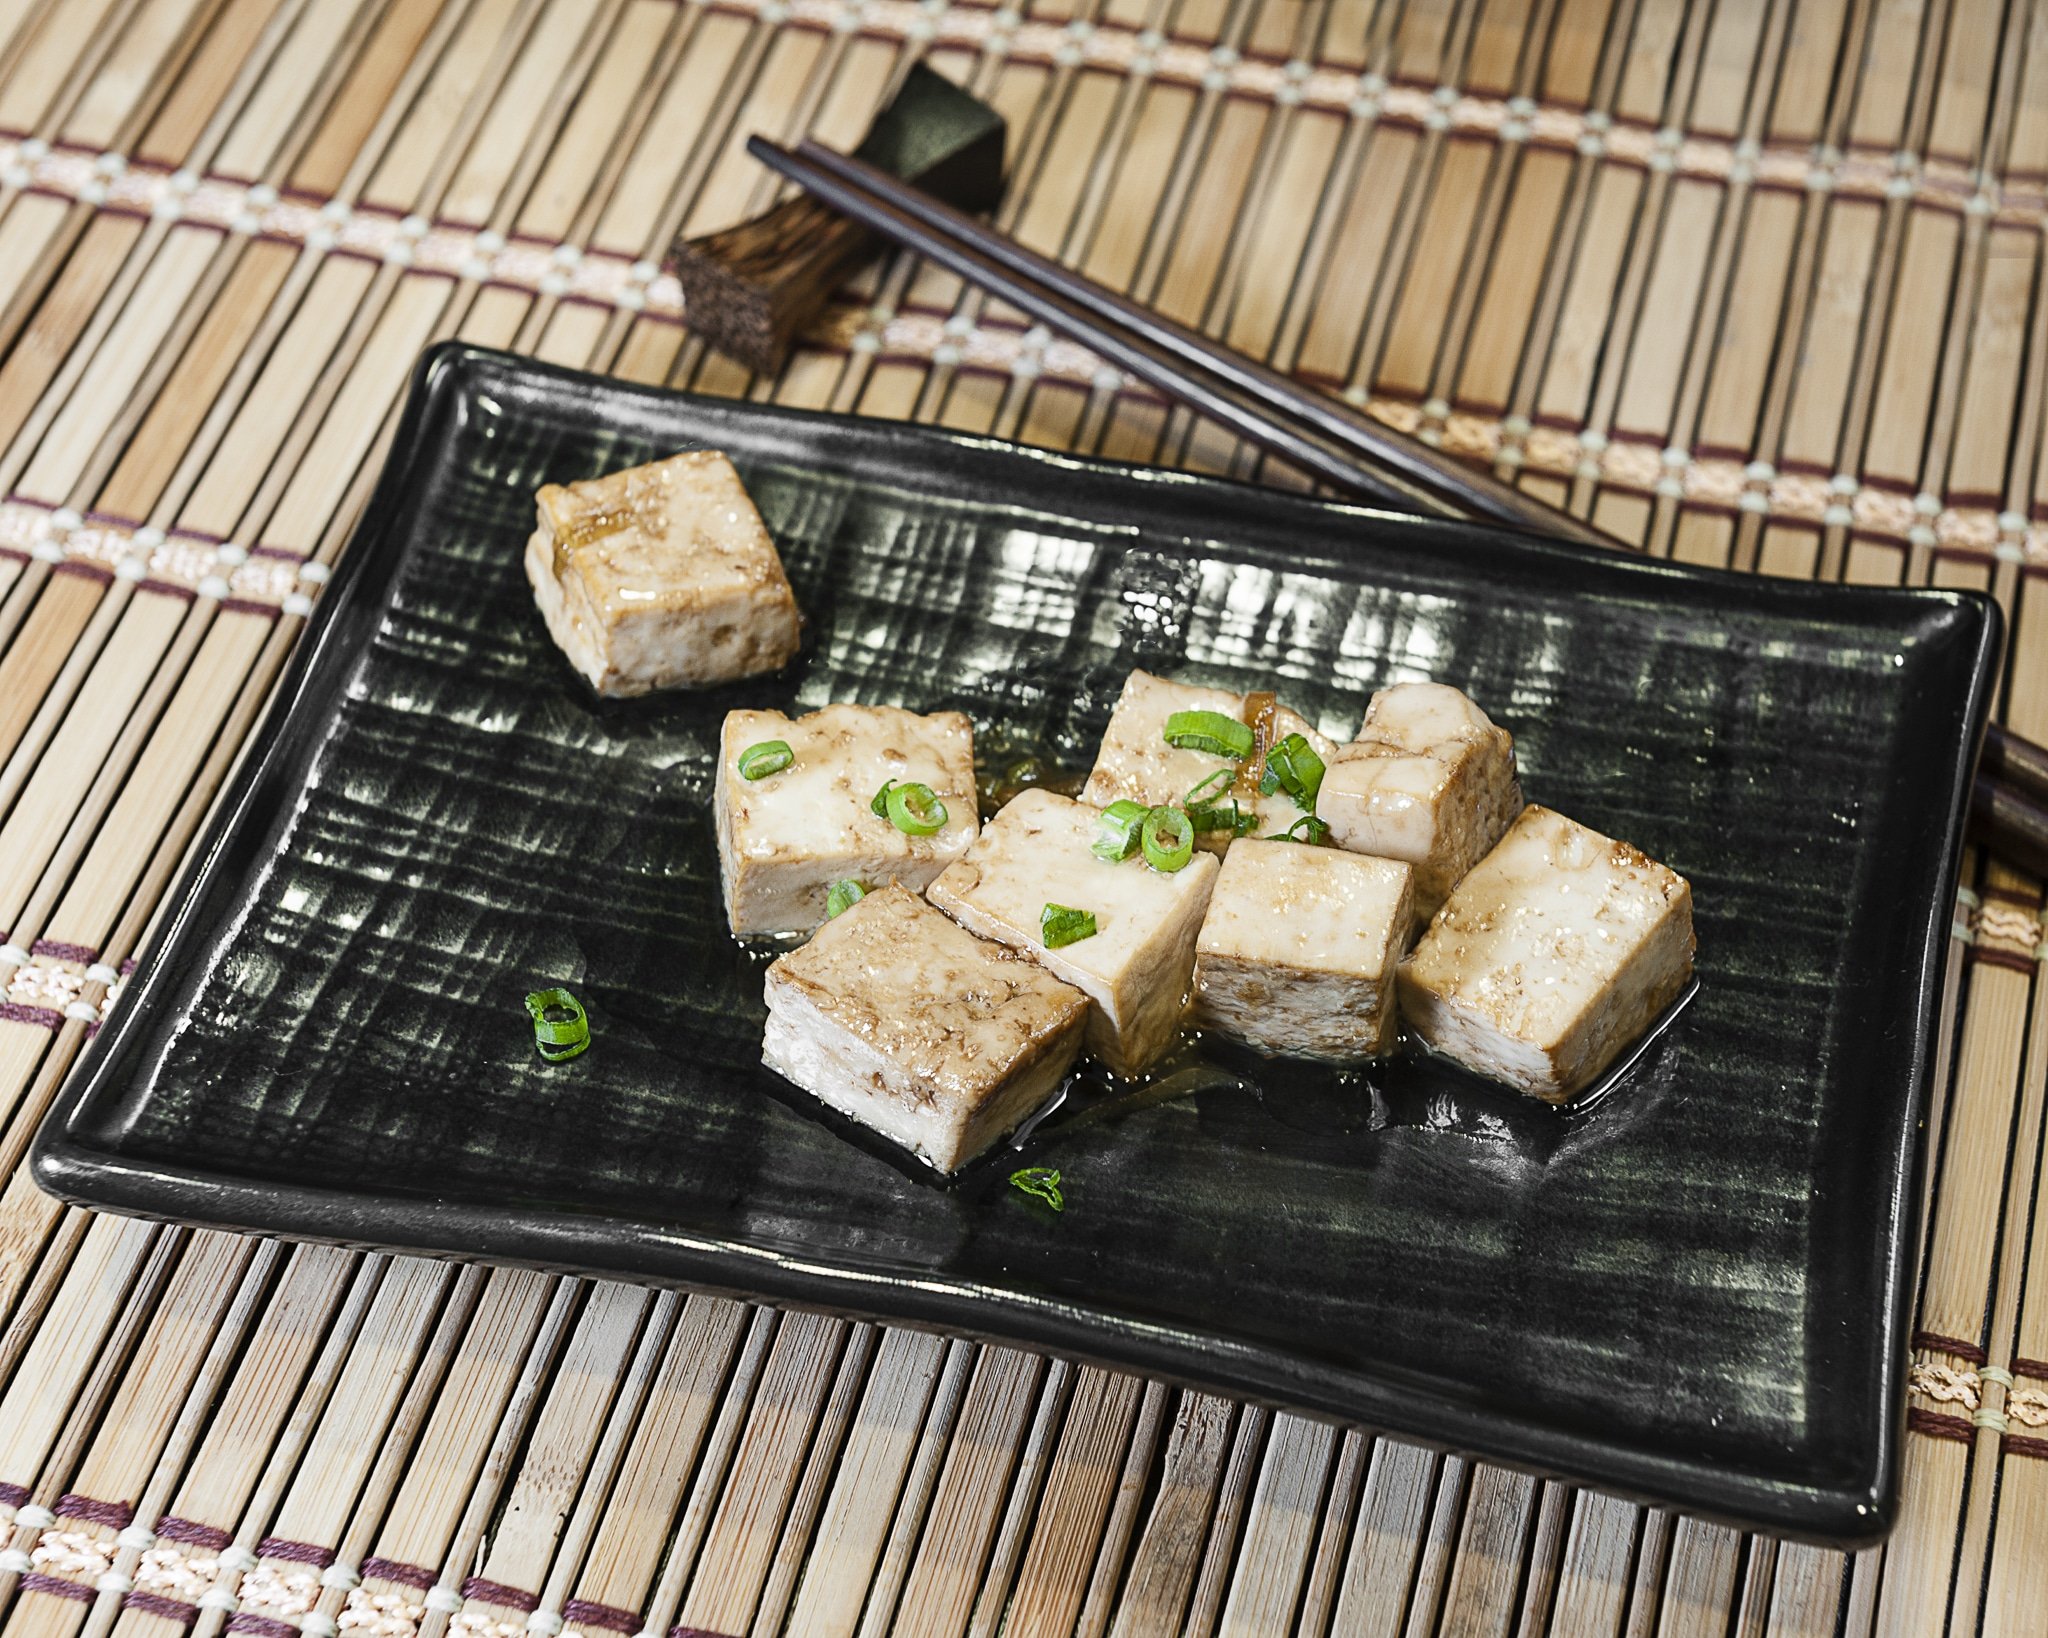 Prepared tofu dish with scallions on a black rectangular serving tray sitting on top of a bamboo mat.